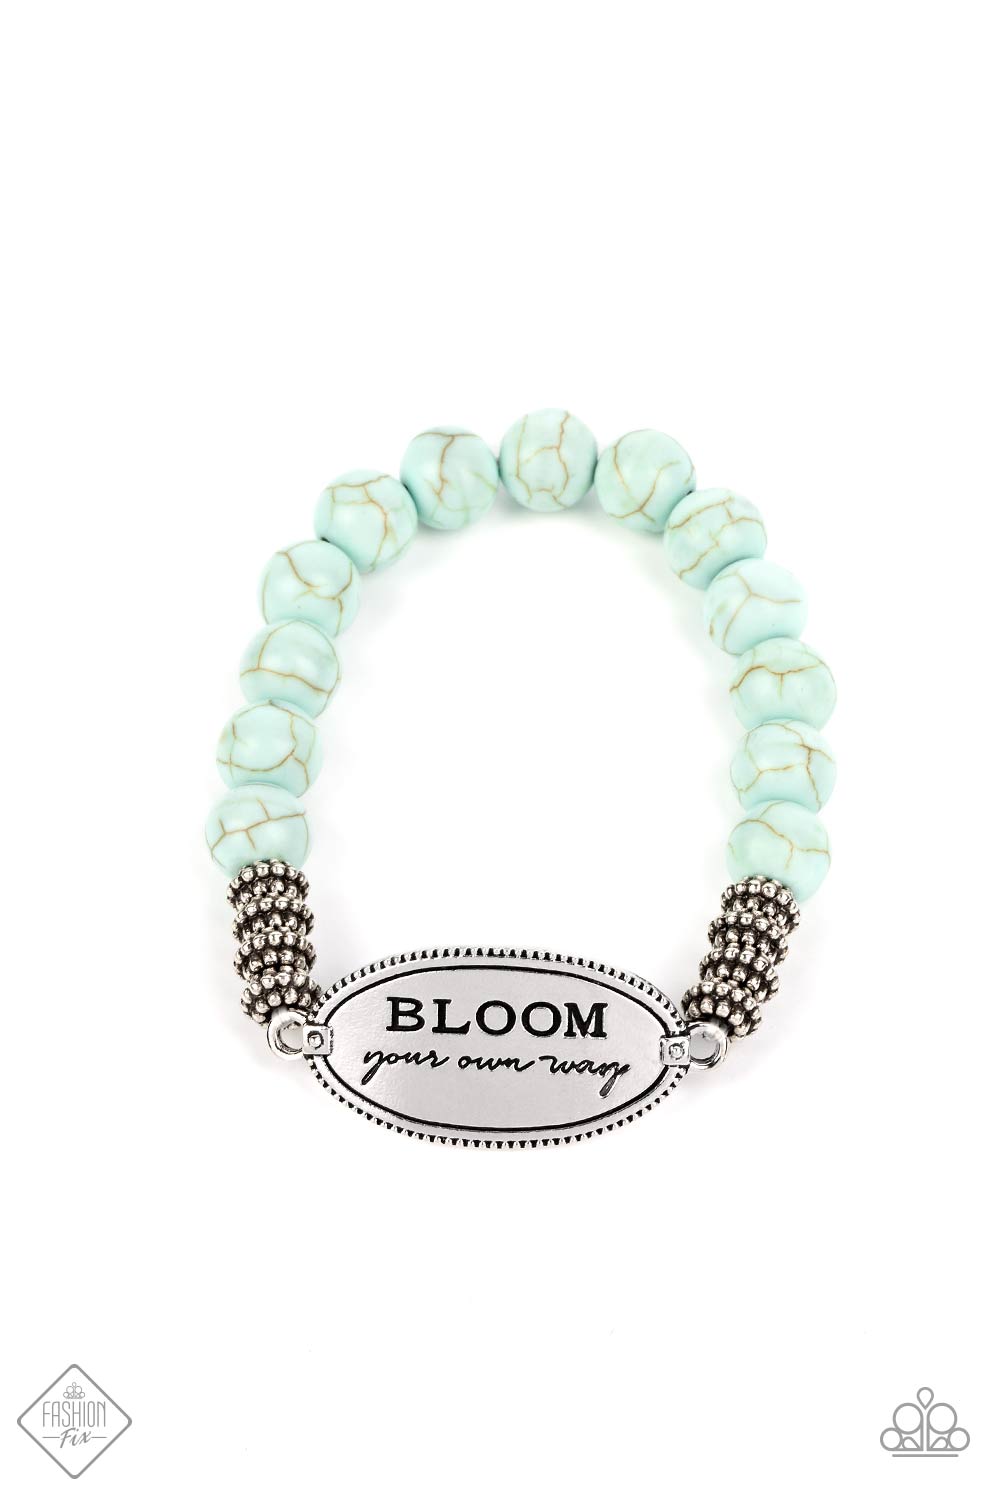 Bedouin Bloom Blue Bracelet - Paparazzi Accessories  An asymmetrical textured oval pendant features the phrase "BLOOM your own way" in a variety of fonts to emphasize the inspirational message. Four textured wheels fan out from the pendant to a refreshing collection of light blue stones that stretch along the wrist on an elastic stretchy band for a charming pop of color along the wrist. As the stone elements in this piece are natural, some color variation is normal.  Sold as one individual bracelet.